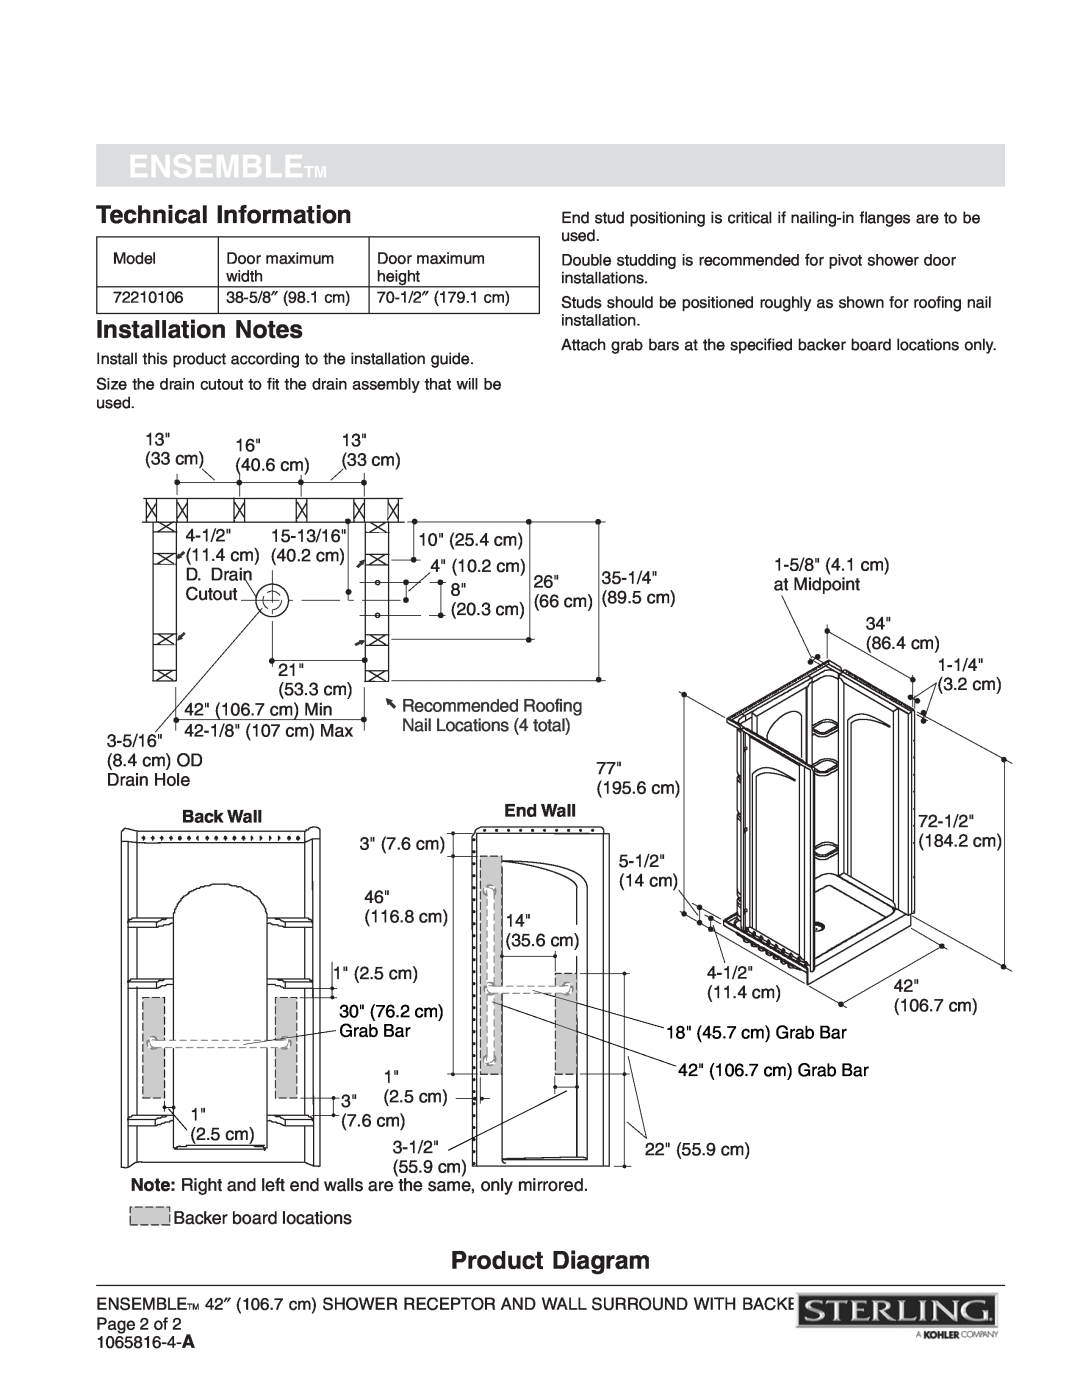 Sterling Plumbing 72210106 Technical Information, Installation Notes, Product Diagram, Ensembletm, Recommended Roofing 